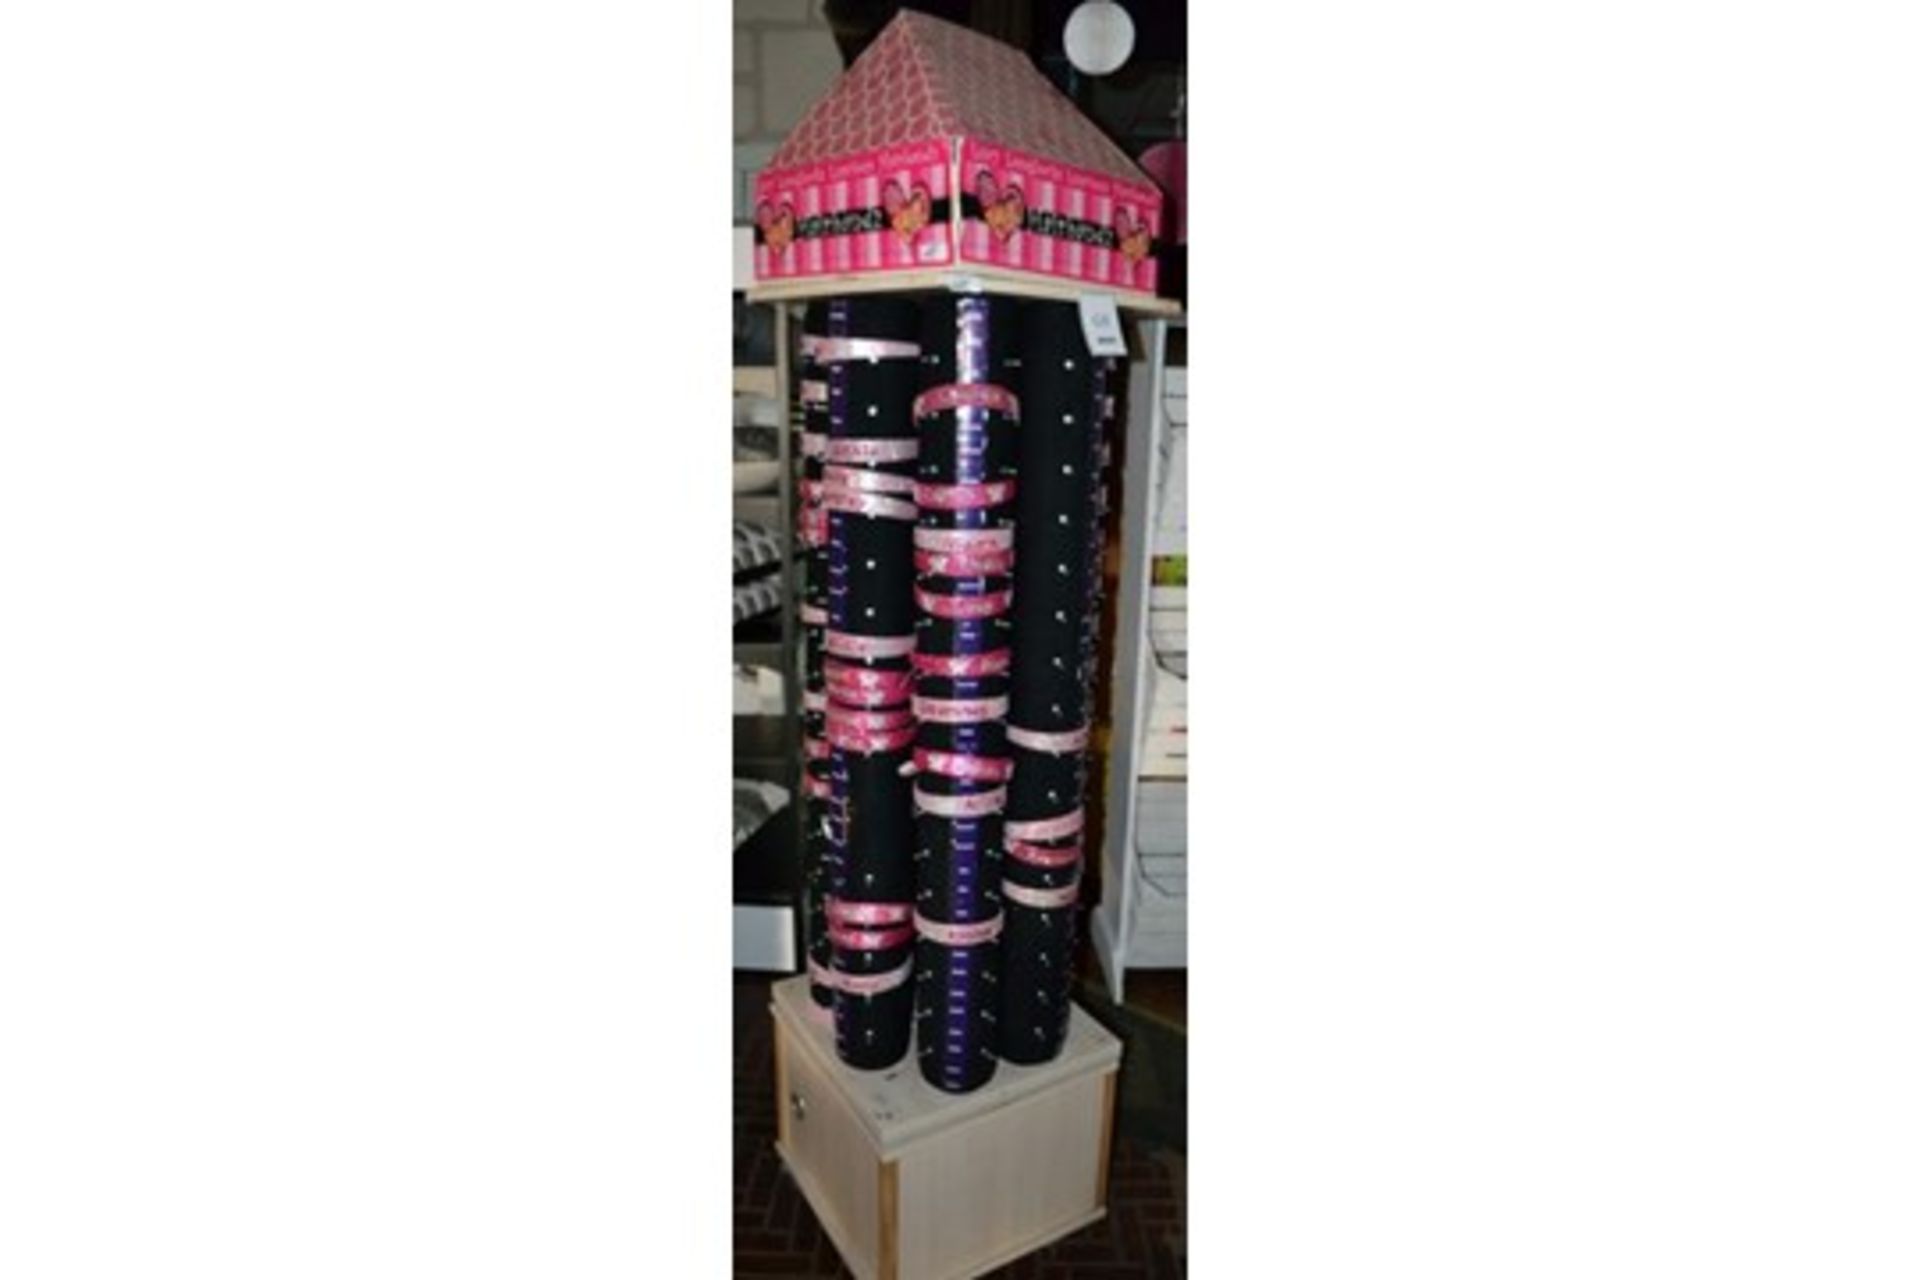 27 x Retail Carousel Display Stands With Approximately 2,800 Items of Resale Stock - Includes - Image 41 of 61